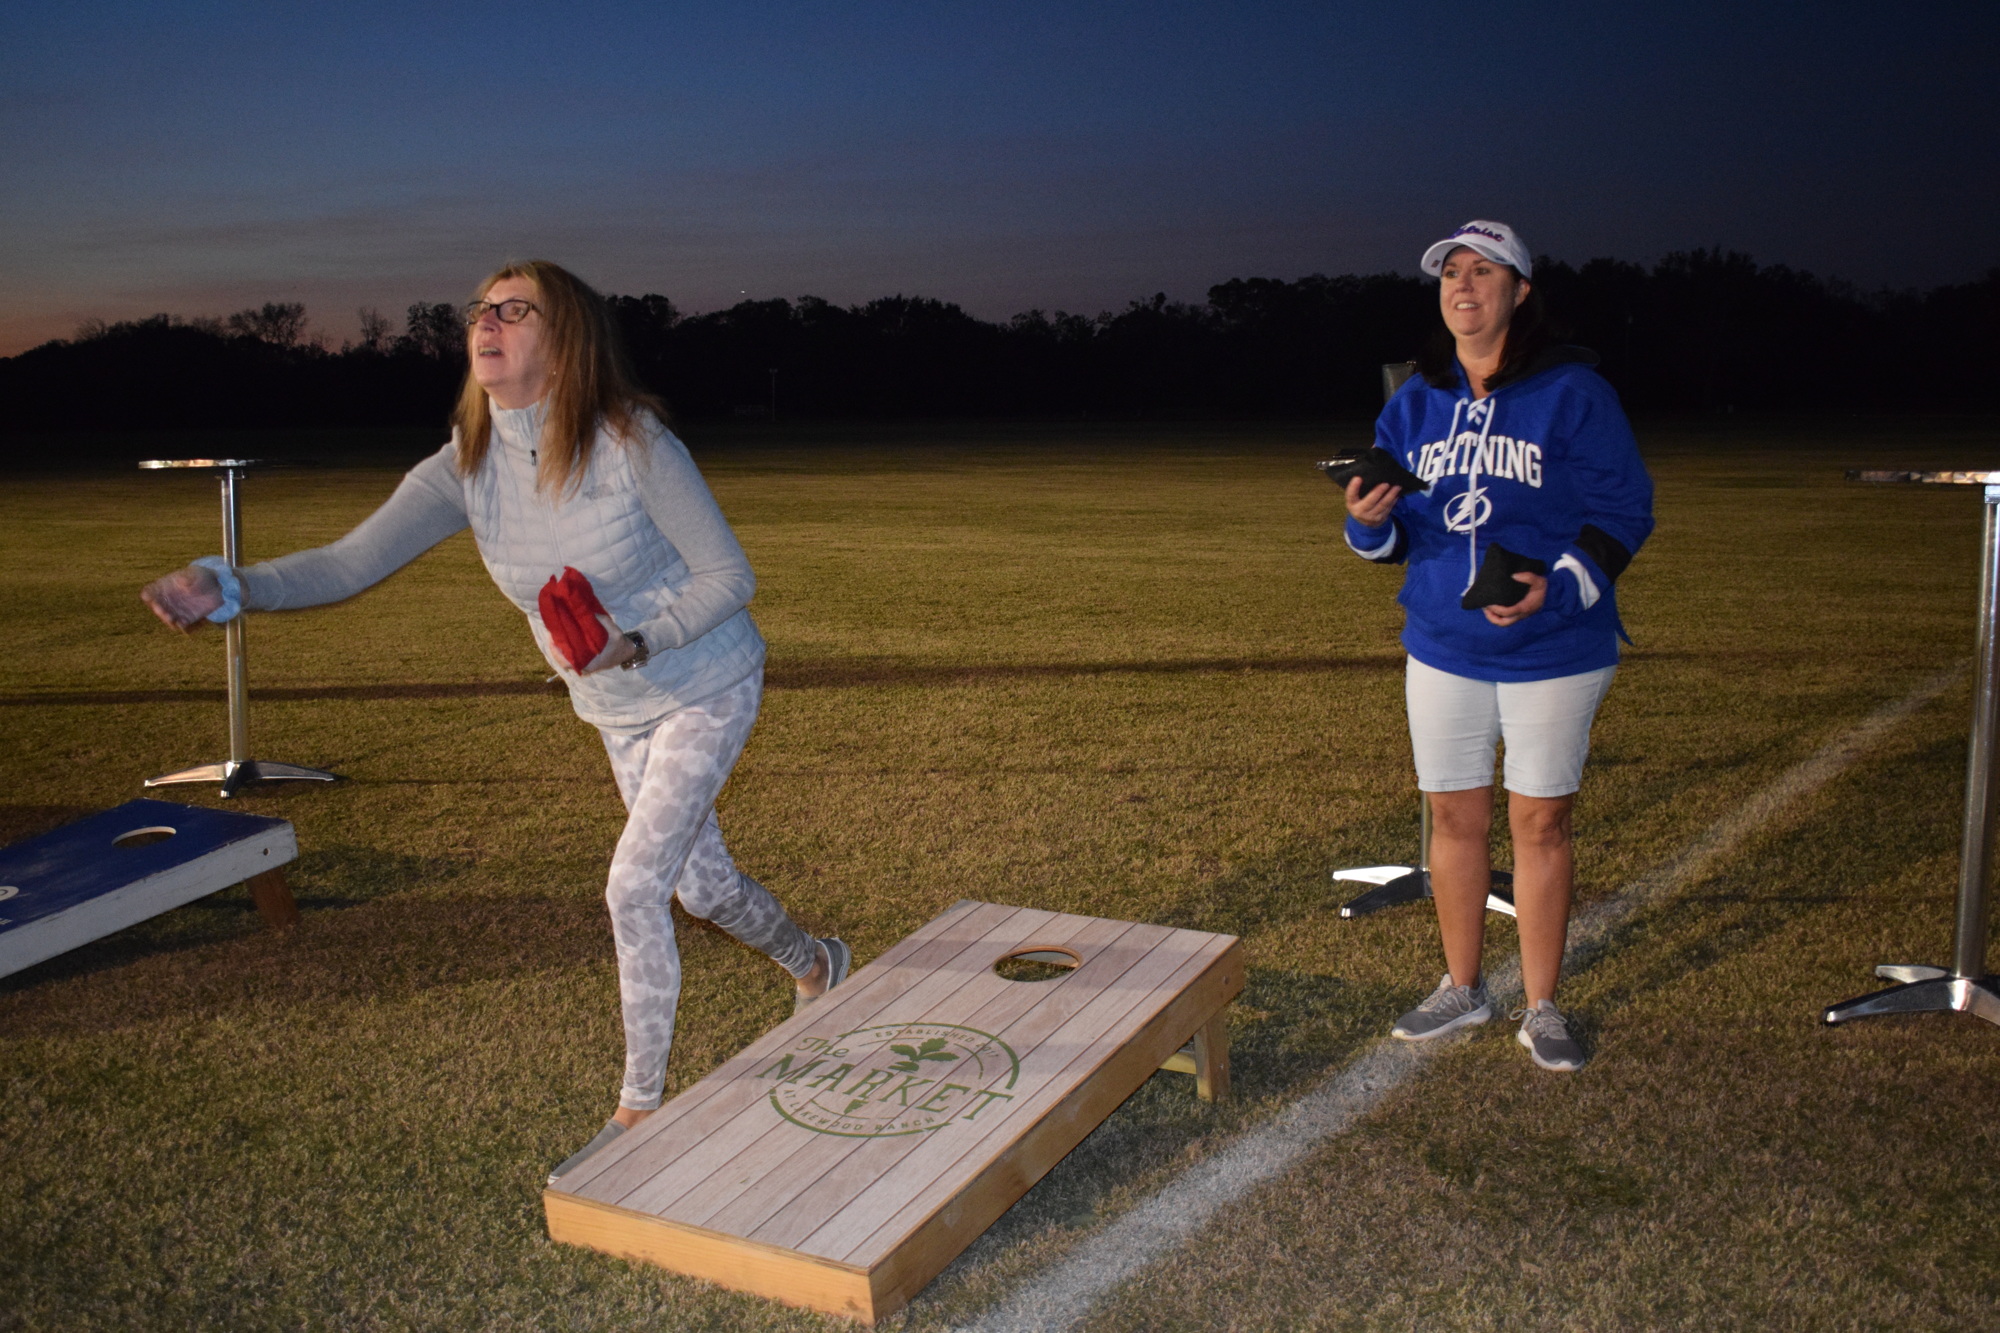 Indigo's Joanne Leger and Apollo Beach's Cynthia McGaha, who have been best friends for at least 20 years, have fun while playing cornhole.